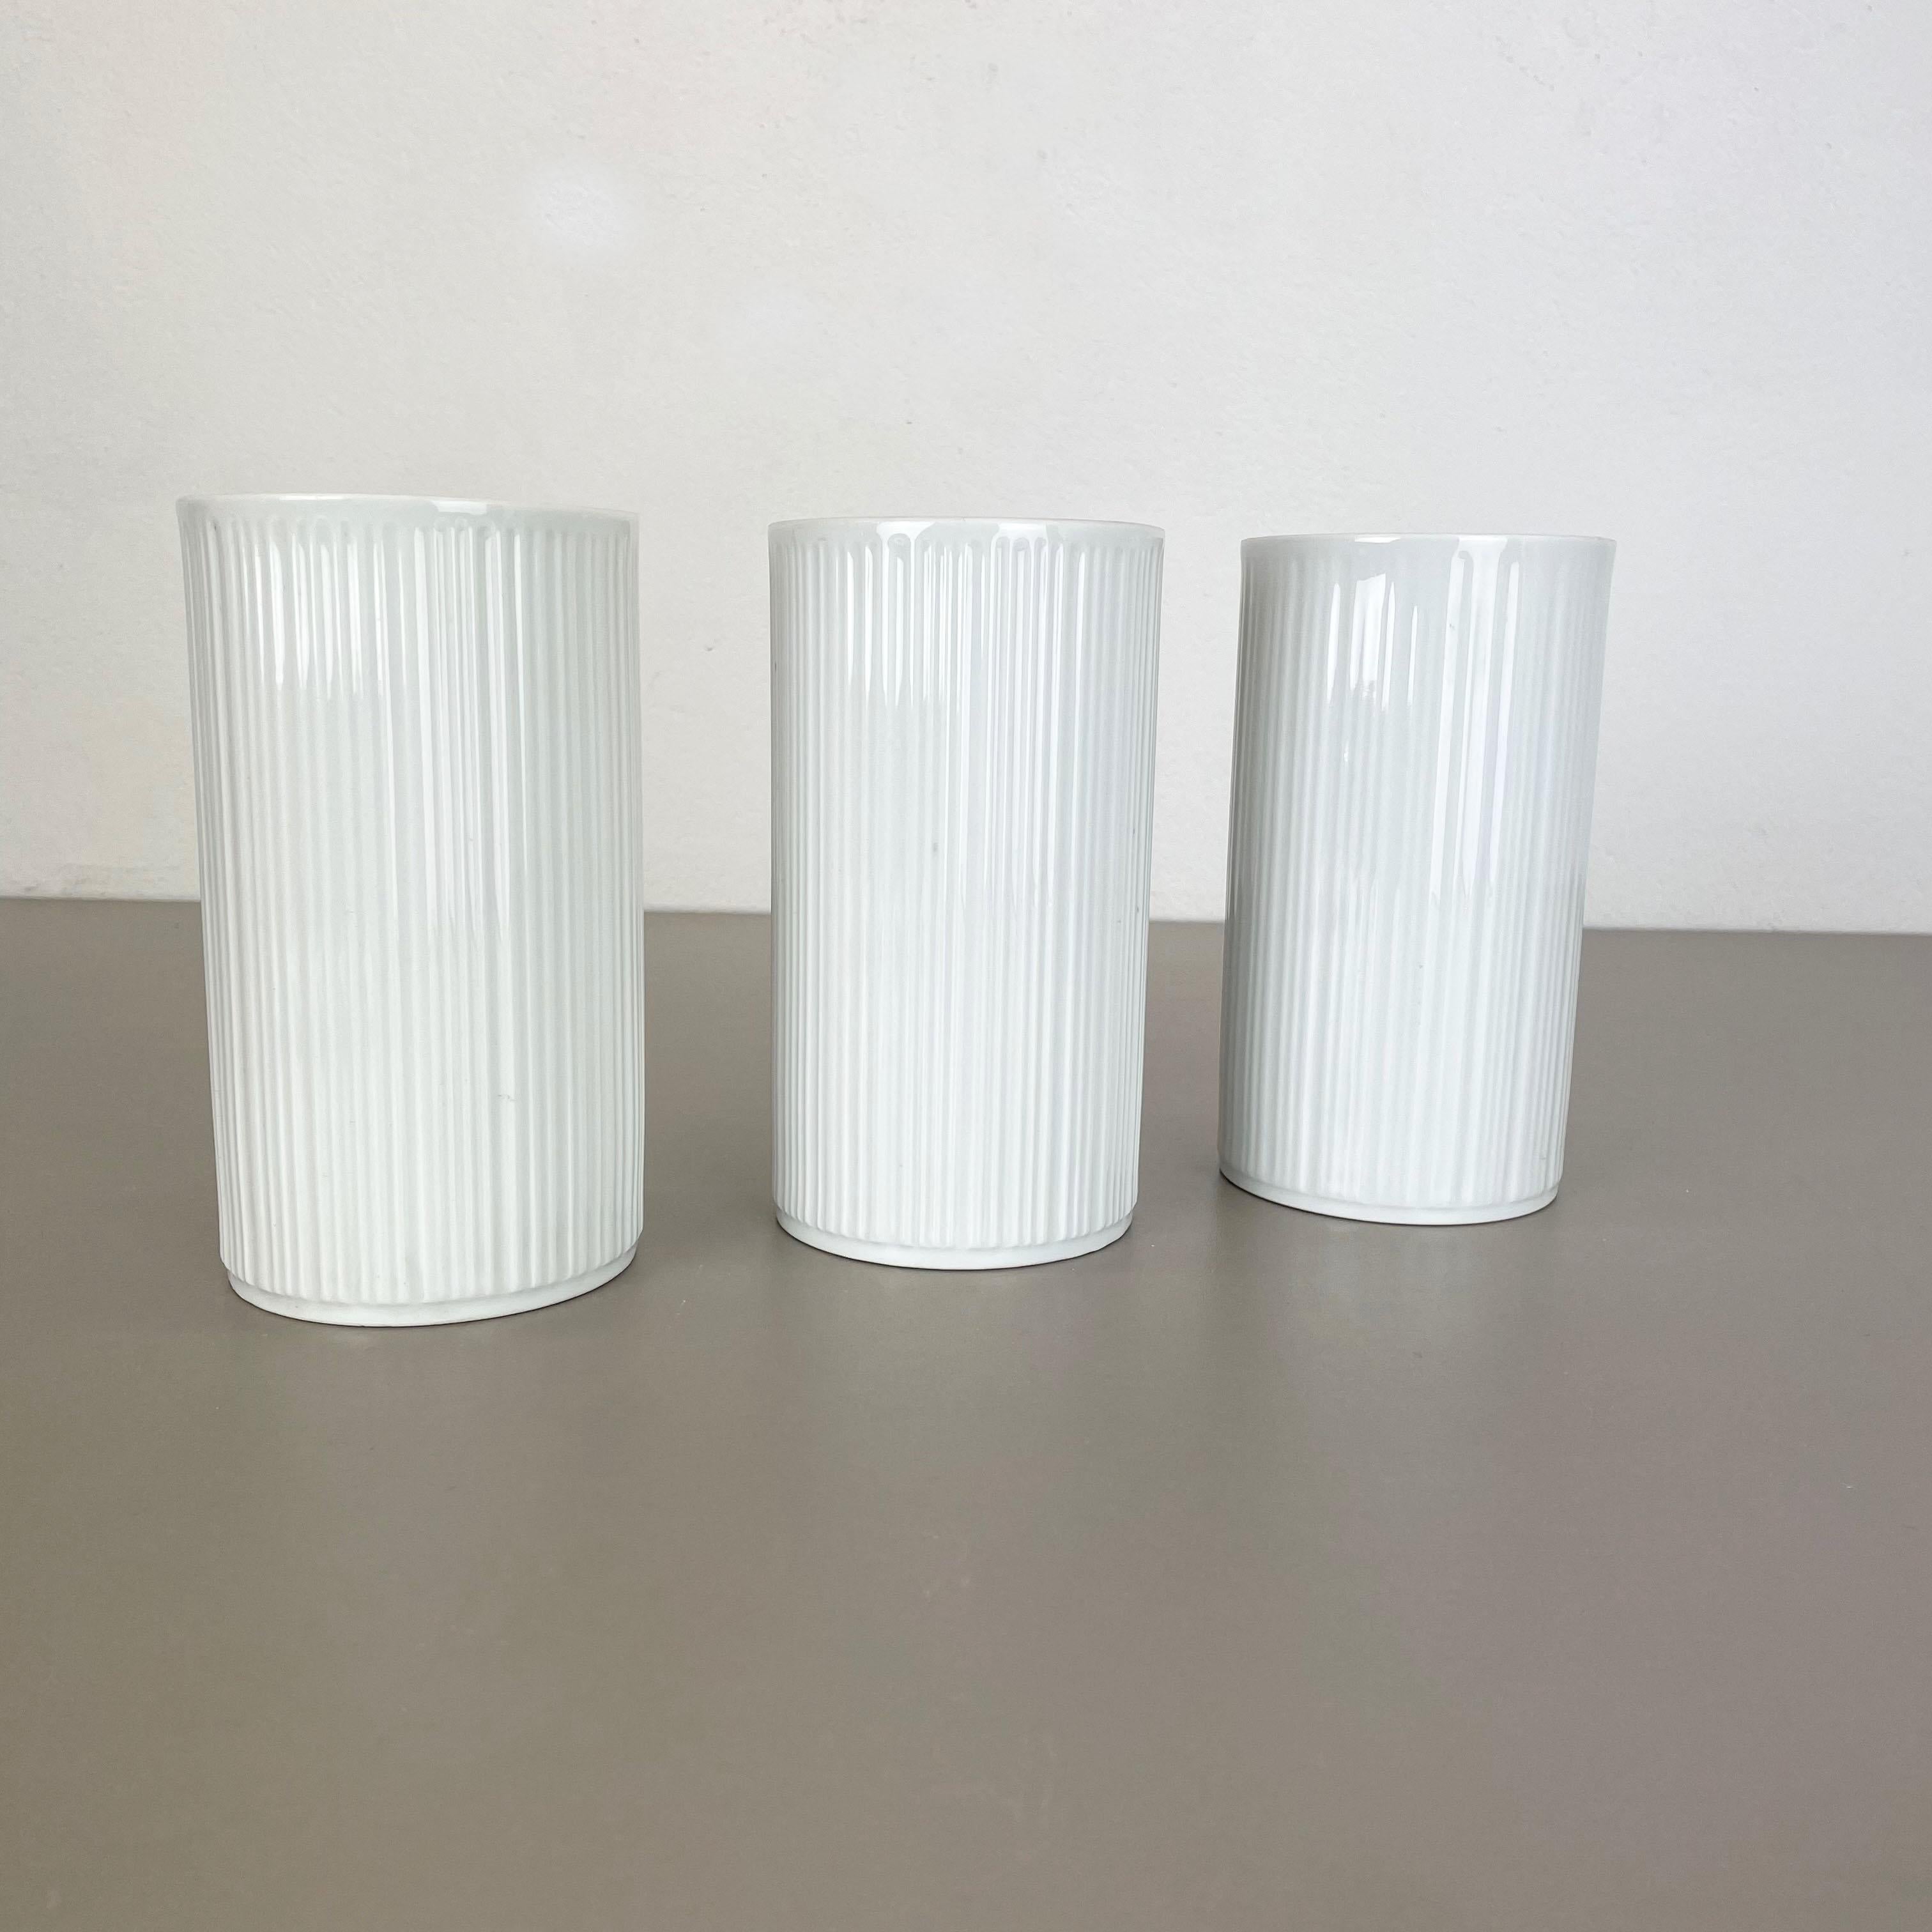 Article:

Op Art porcelain vases set of 3


Producer:

Melitta Minden, Germany

Age:

1970s


This original vintage OP Art vase set was produced in the 1970s in Germany. It is made of porcelain with an OP Art line surface optic. The